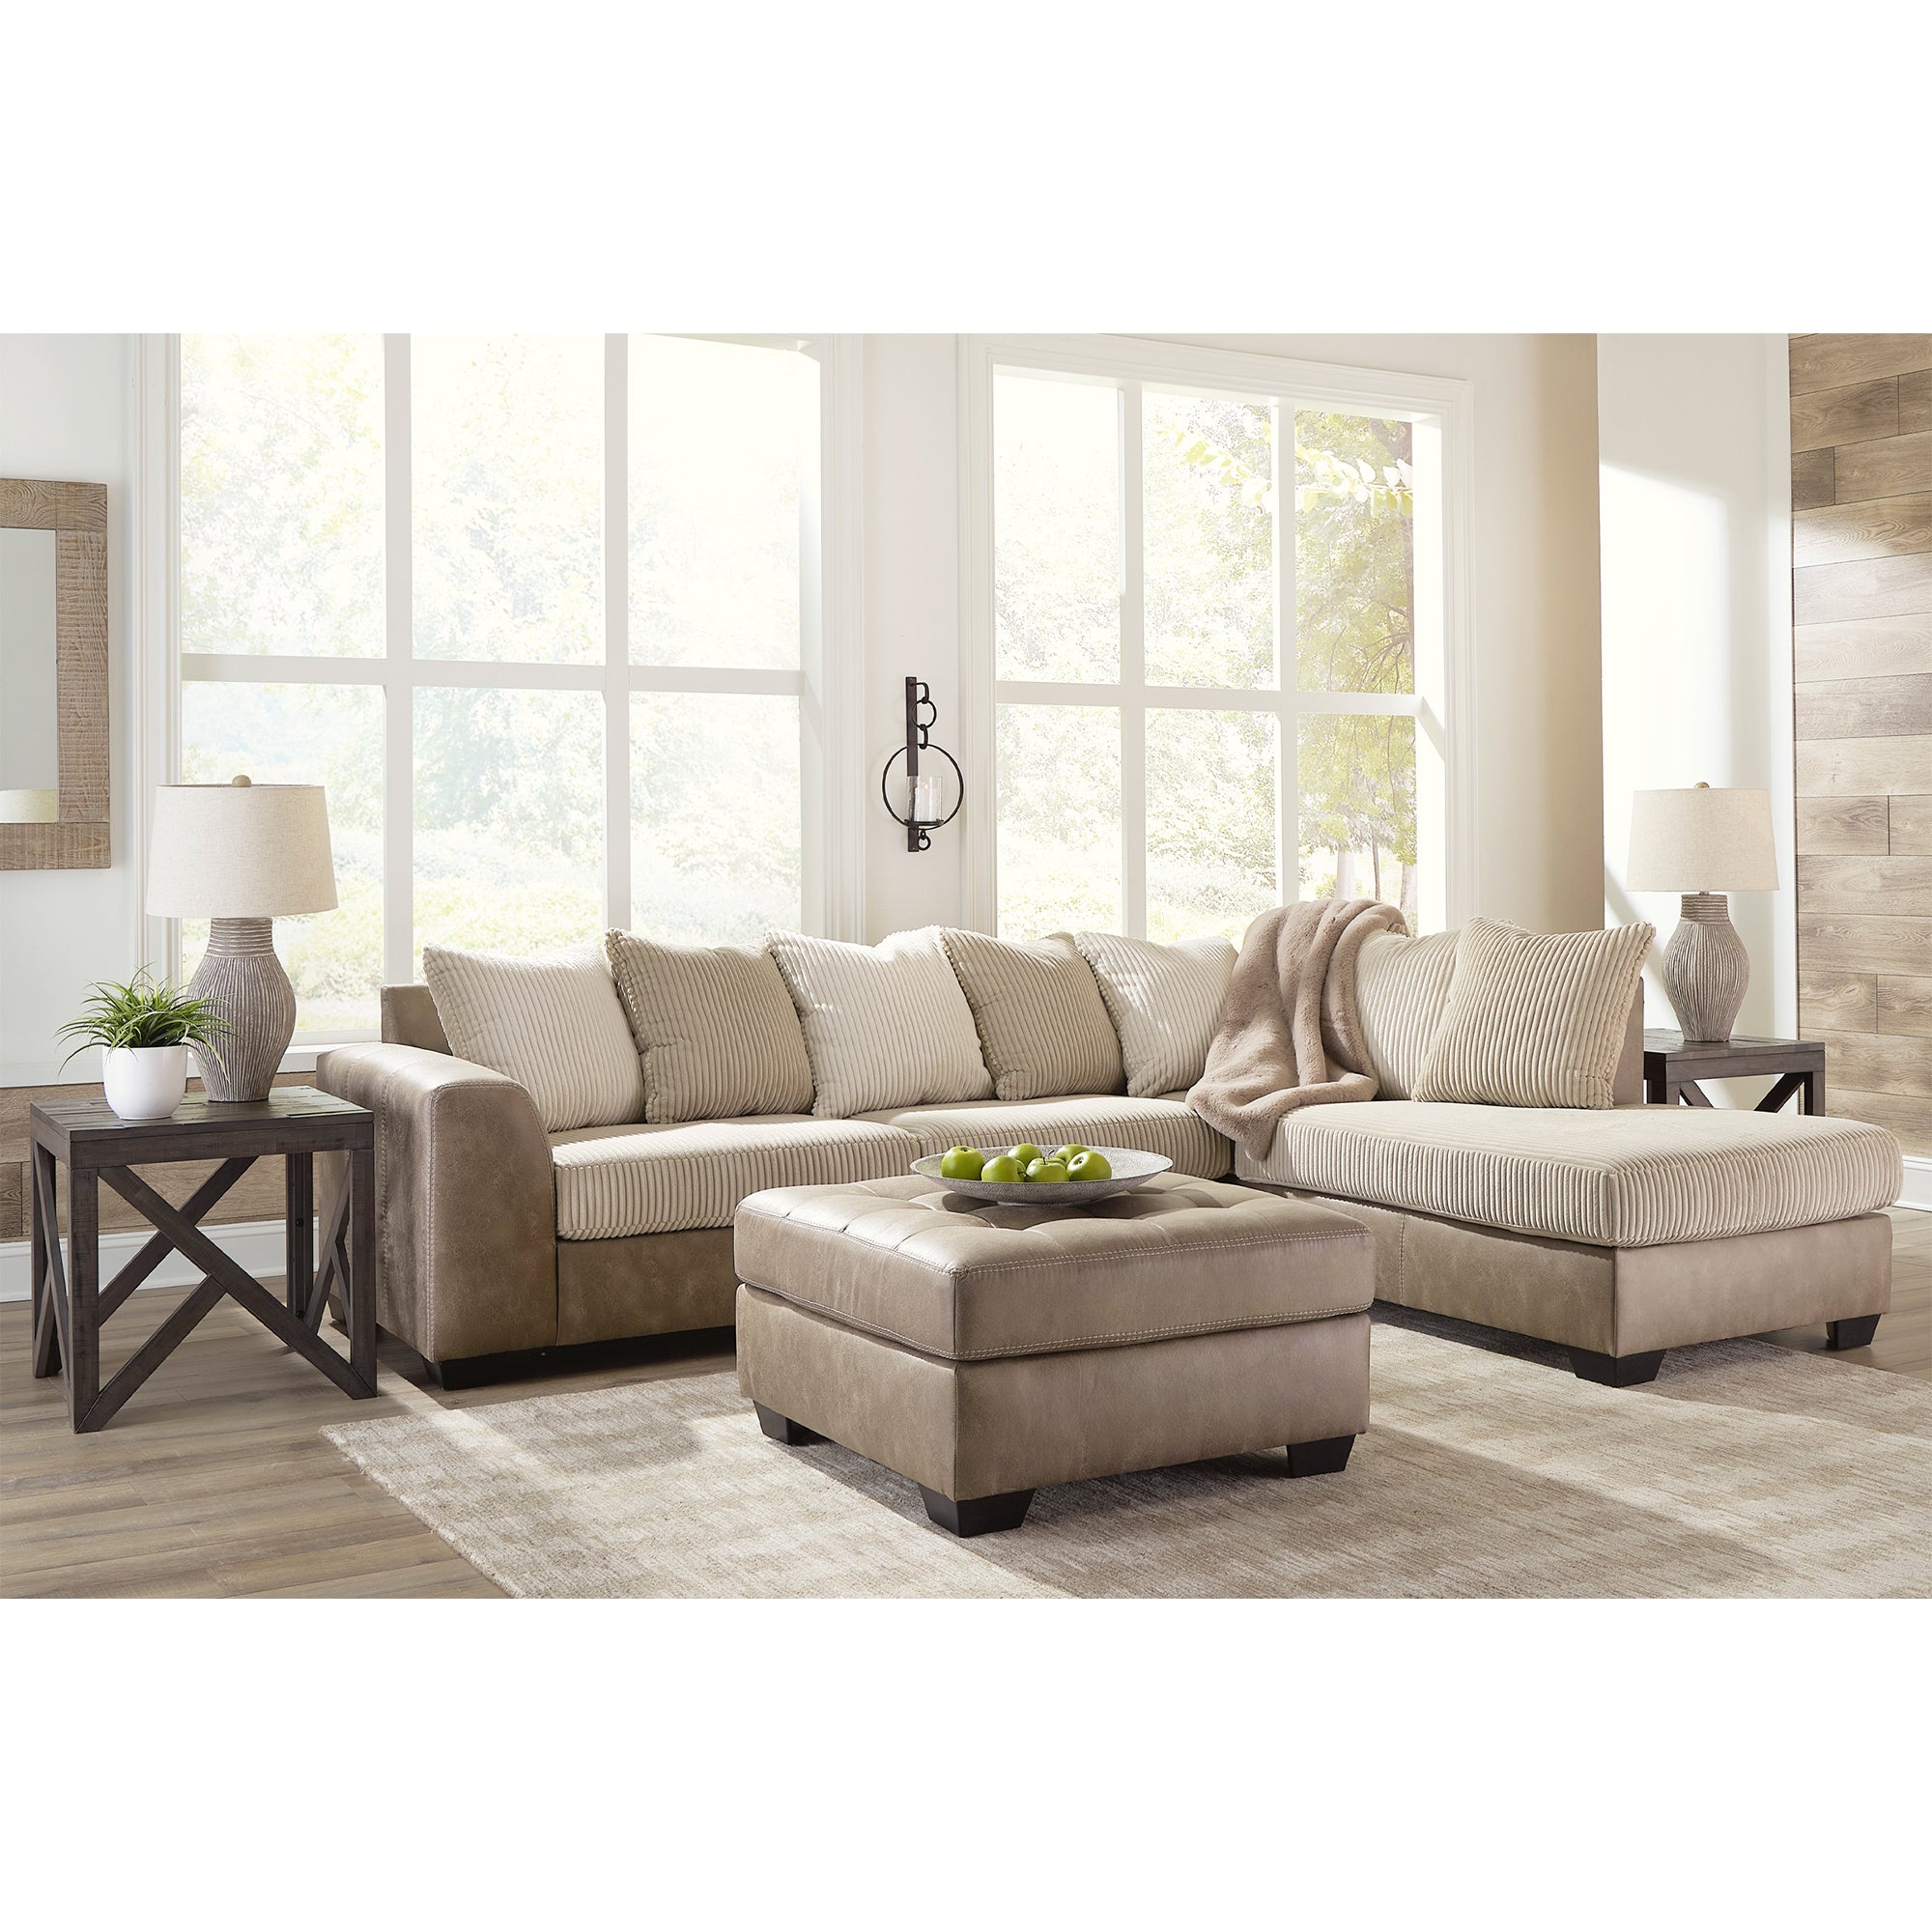 Keskin 2-Piece Sectional with Chaise in Sand Color